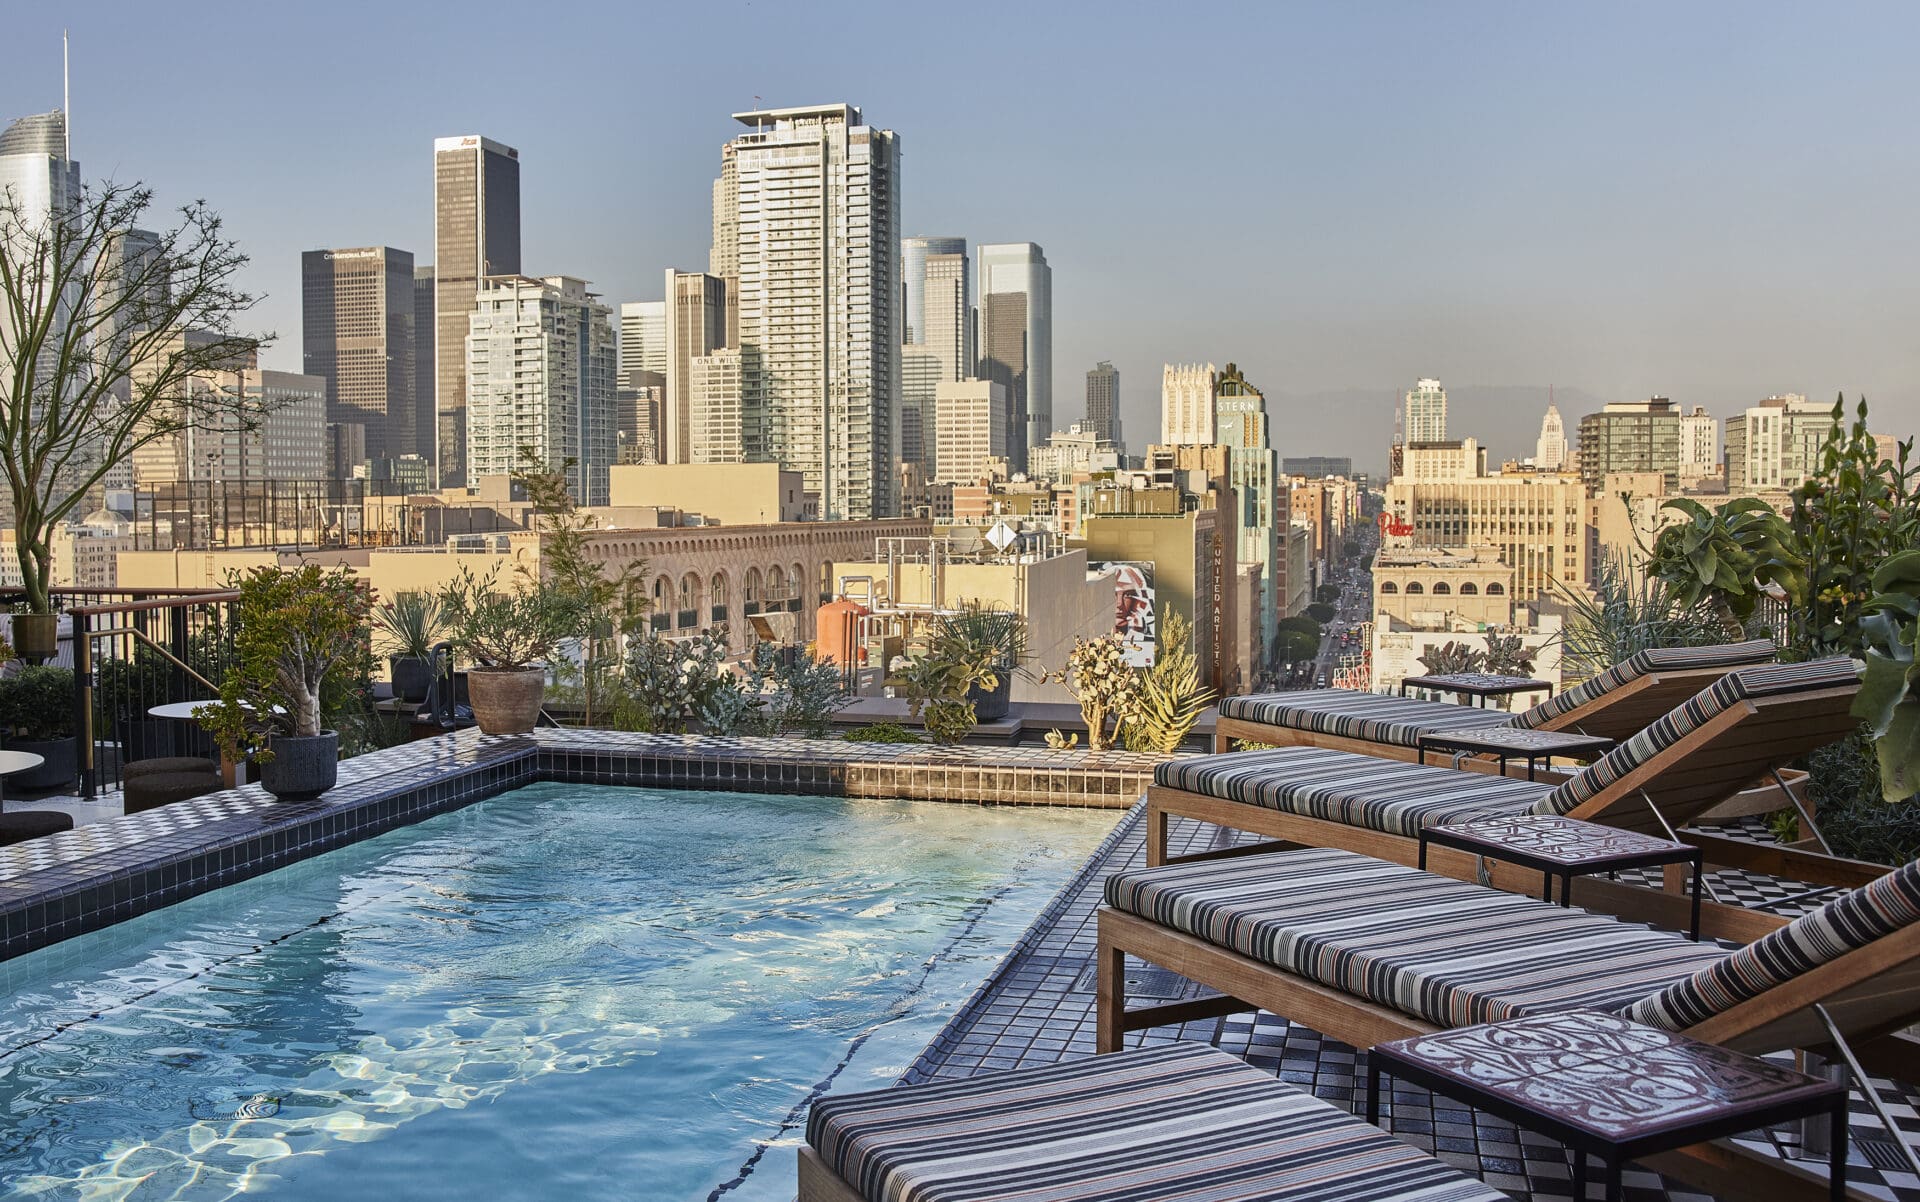 Best places to stay in LA | A rooftop scene at Downtown LA Proper, with a pool and deck chairs in the foreground, and a cityscape of downtown LA in the background